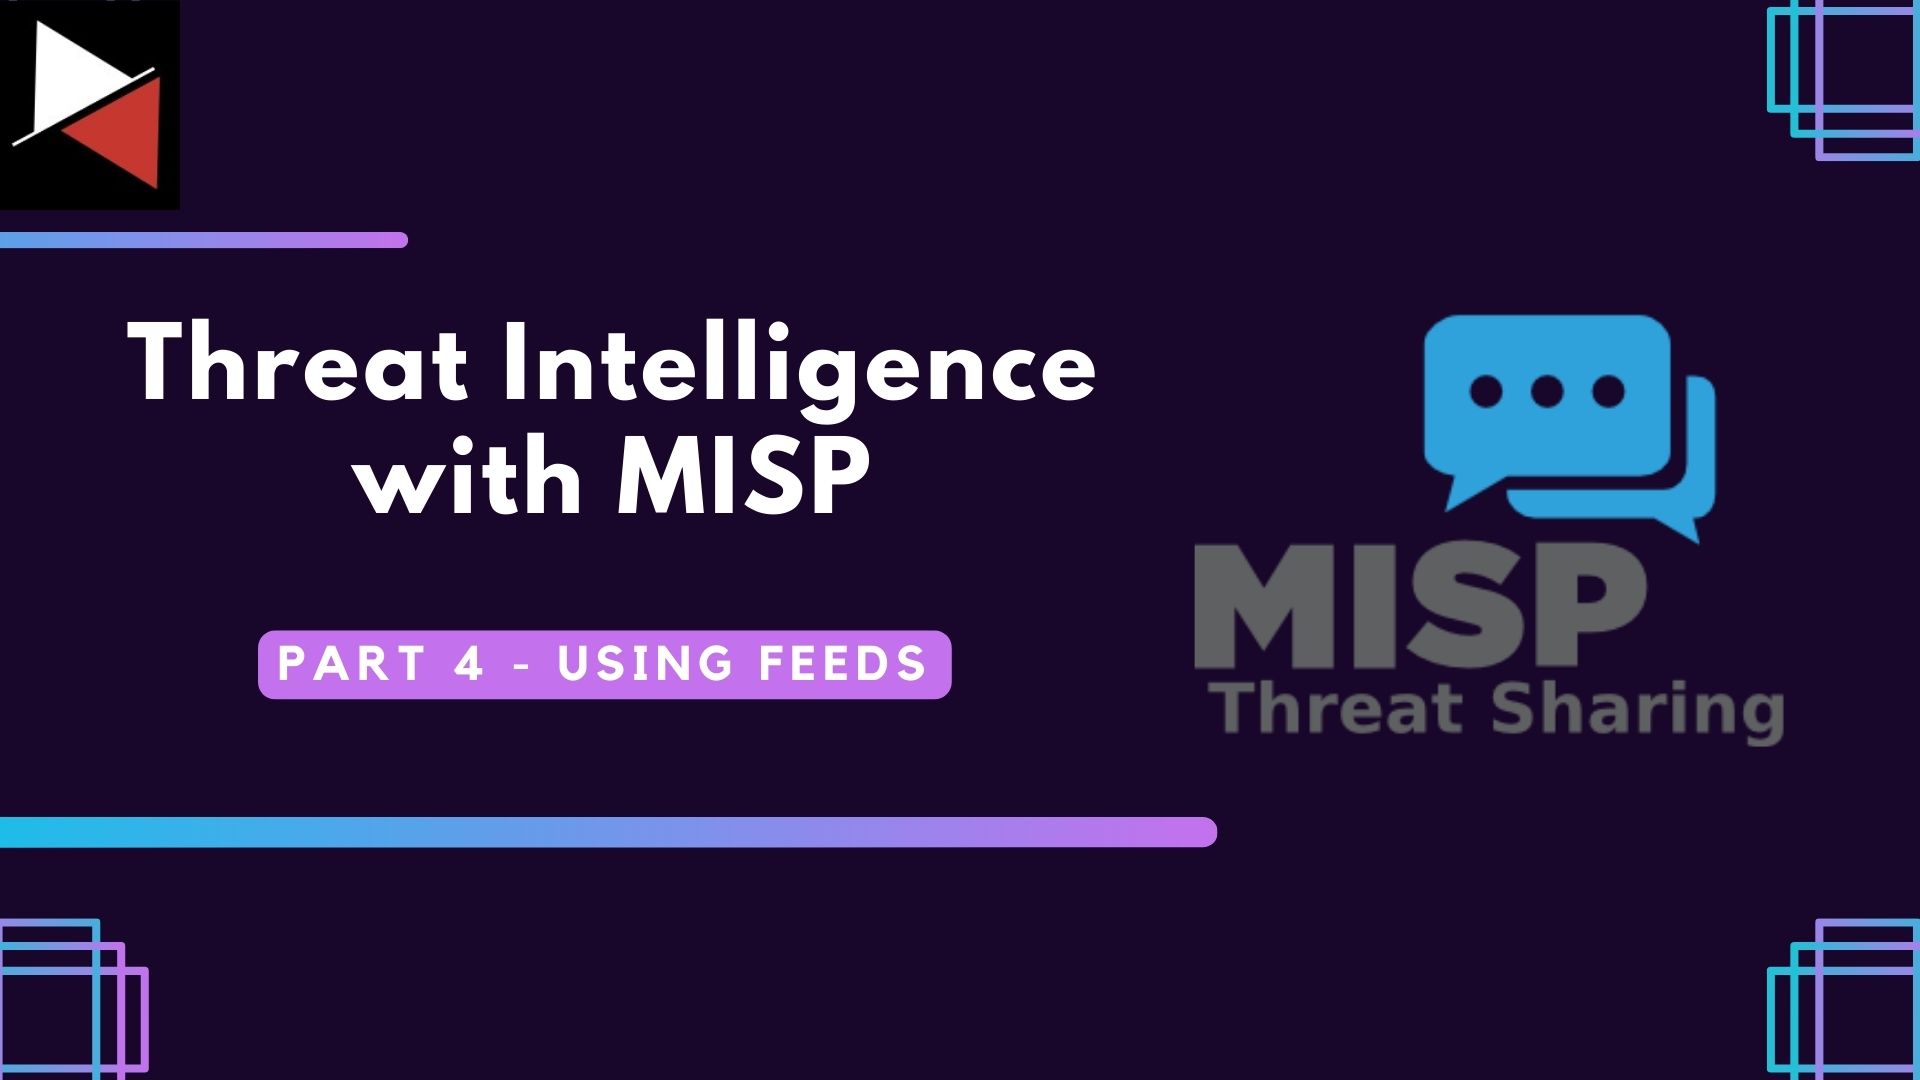 Threat Intelligence with MISP: Part 4 - Using Feeds